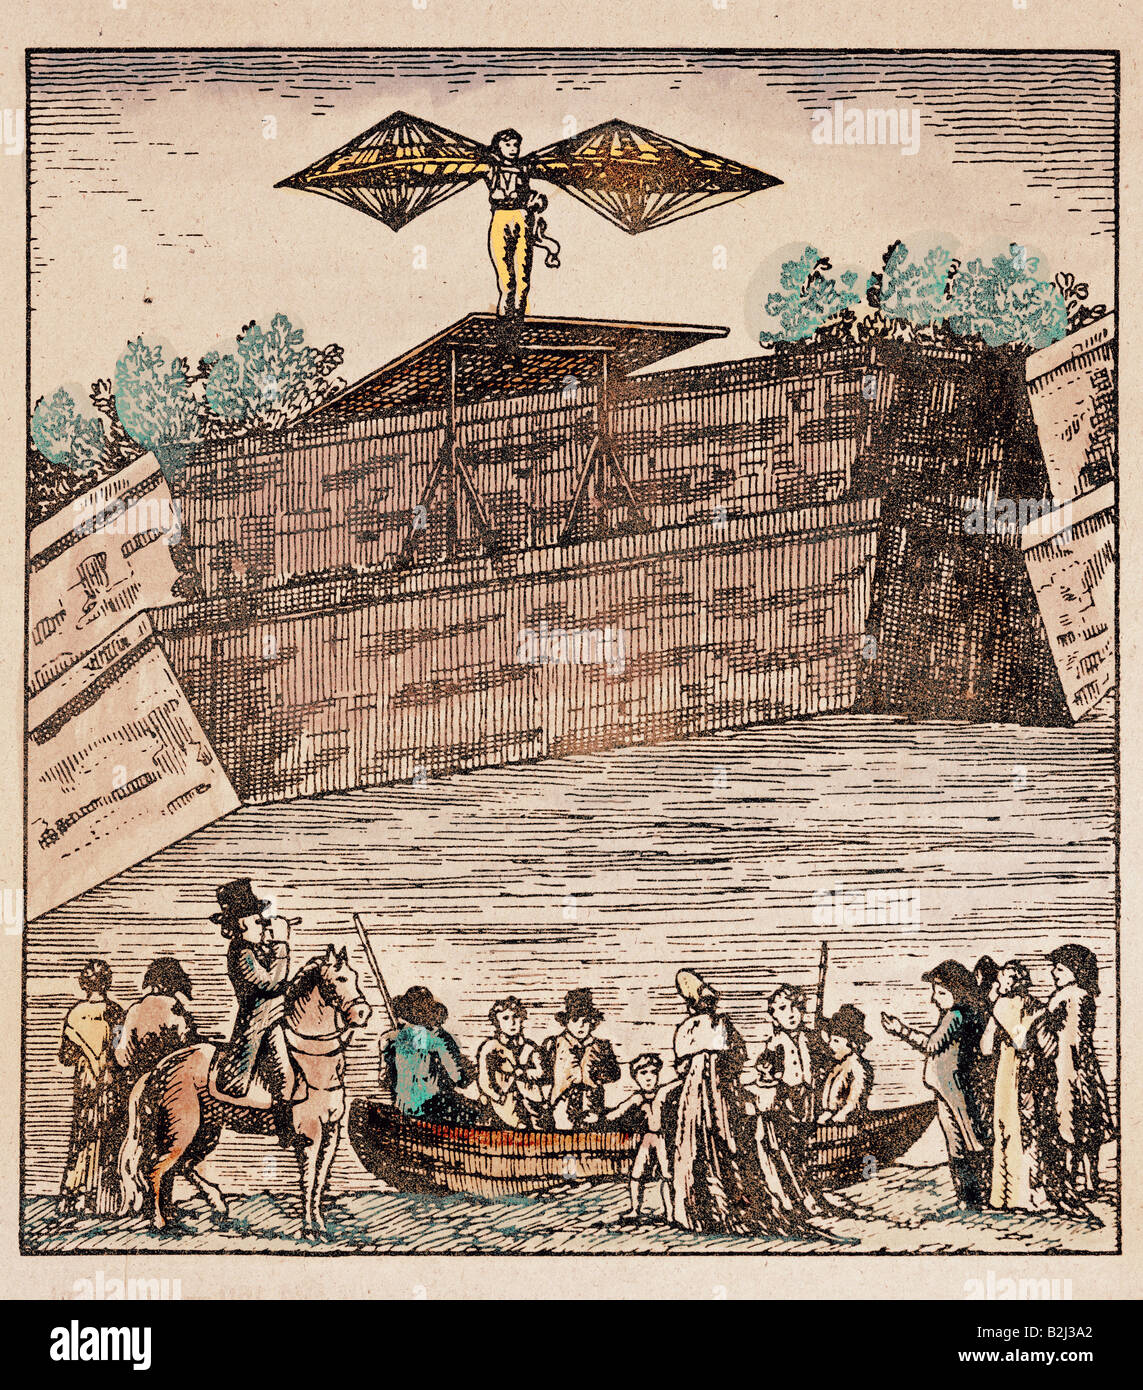 Berblinger, Albrecht Ludwig, 24.6.1770 - 28.1.1829, German tailor and inventor, flying attempt, Ulm, 31.5.1811, coloured copper engraving, 1st half 19th century, private collection, Artist's Copyright has not to be cleared Stock Photo